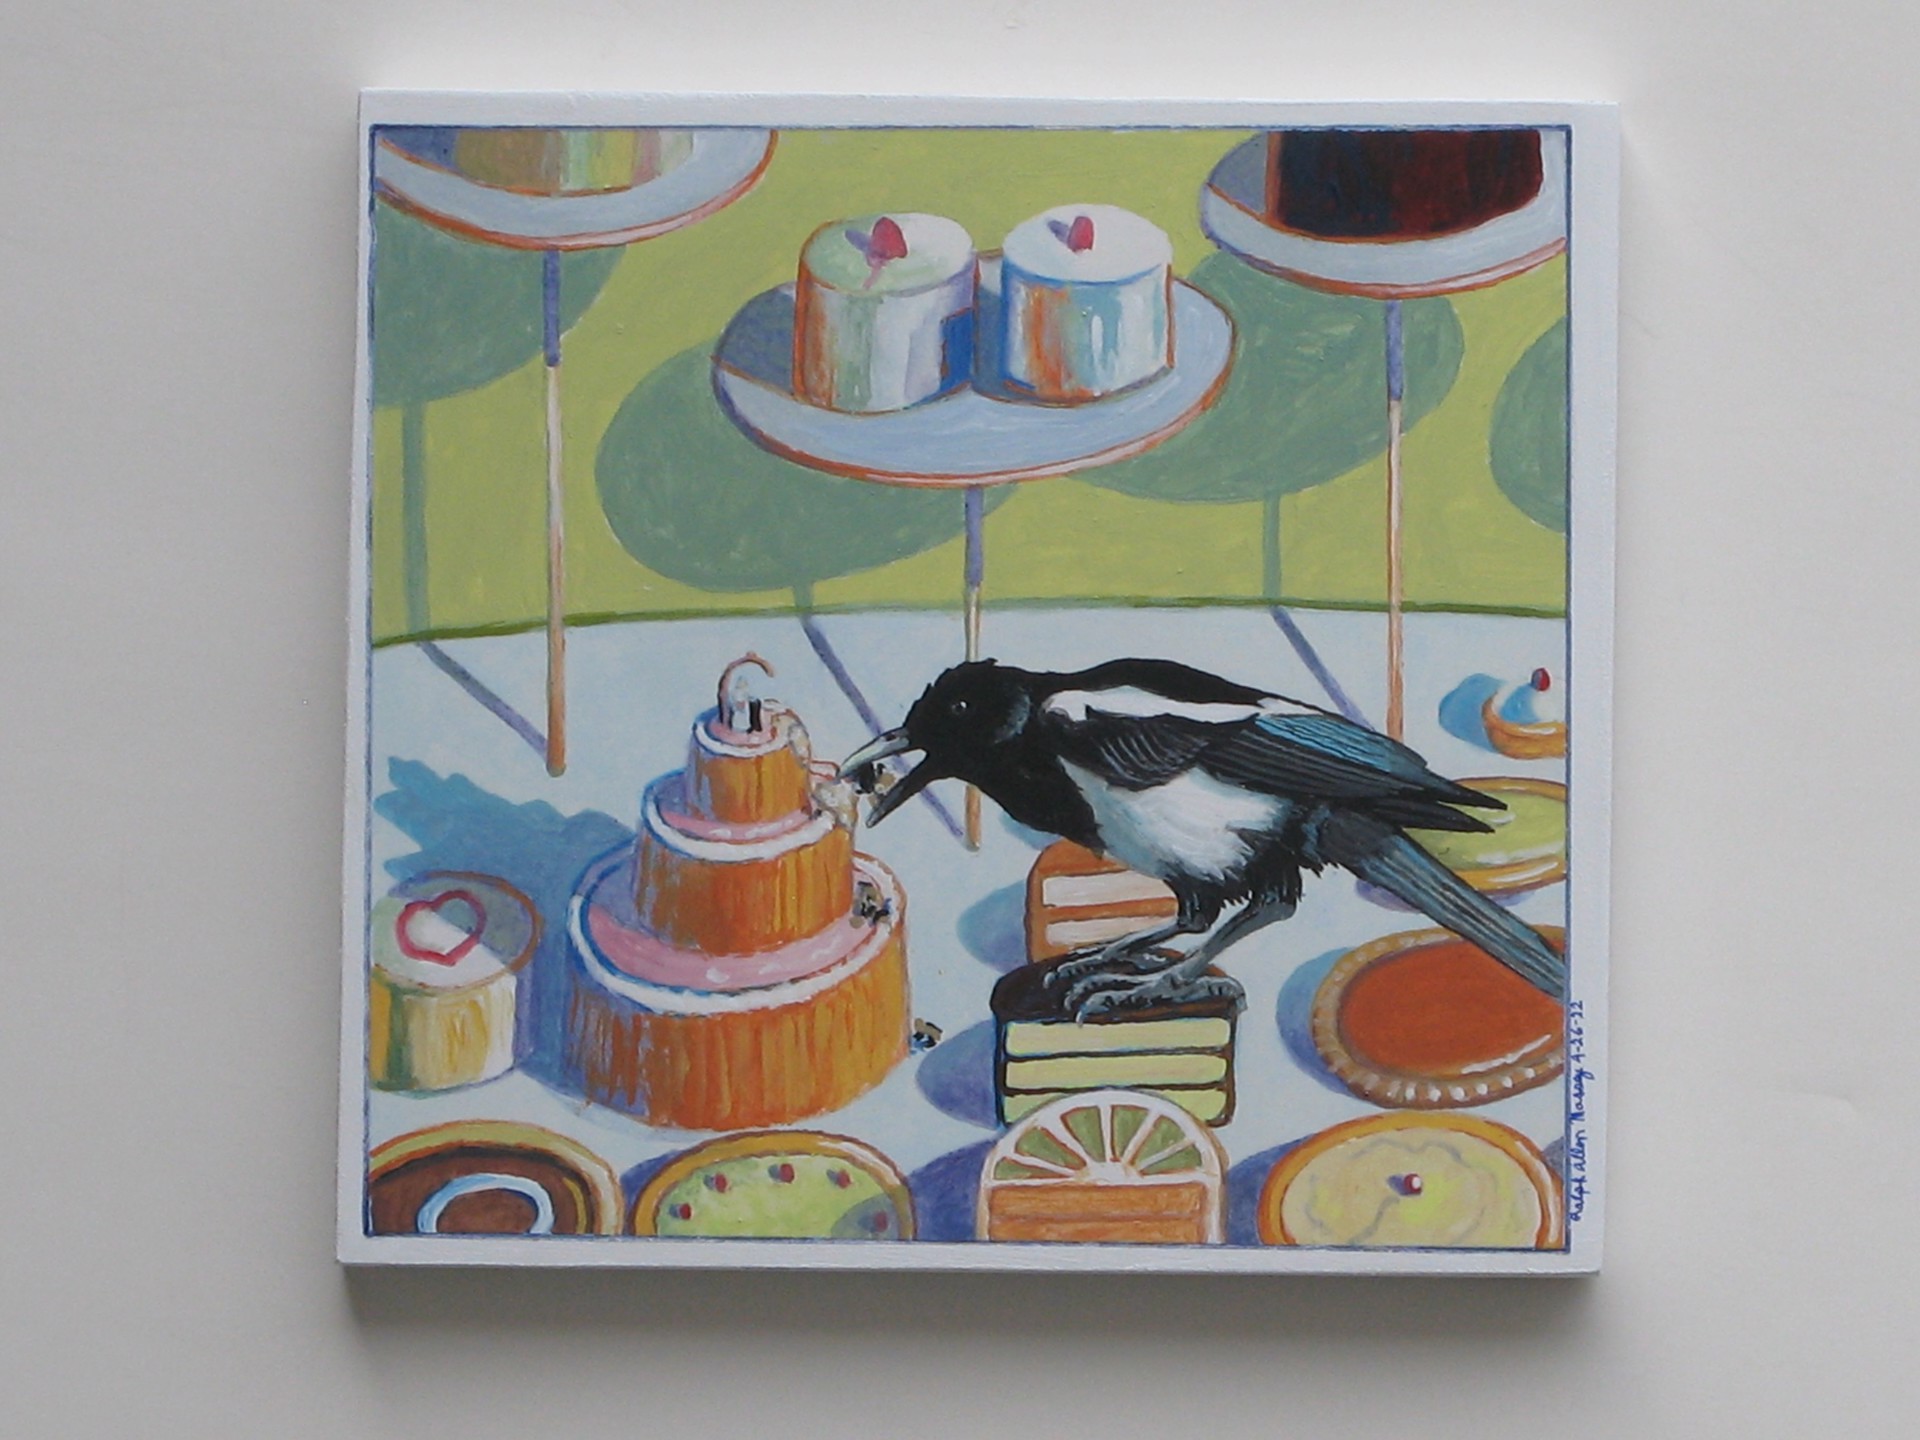 Magpies & Cakes offset #2 by Ralph Allen Massey